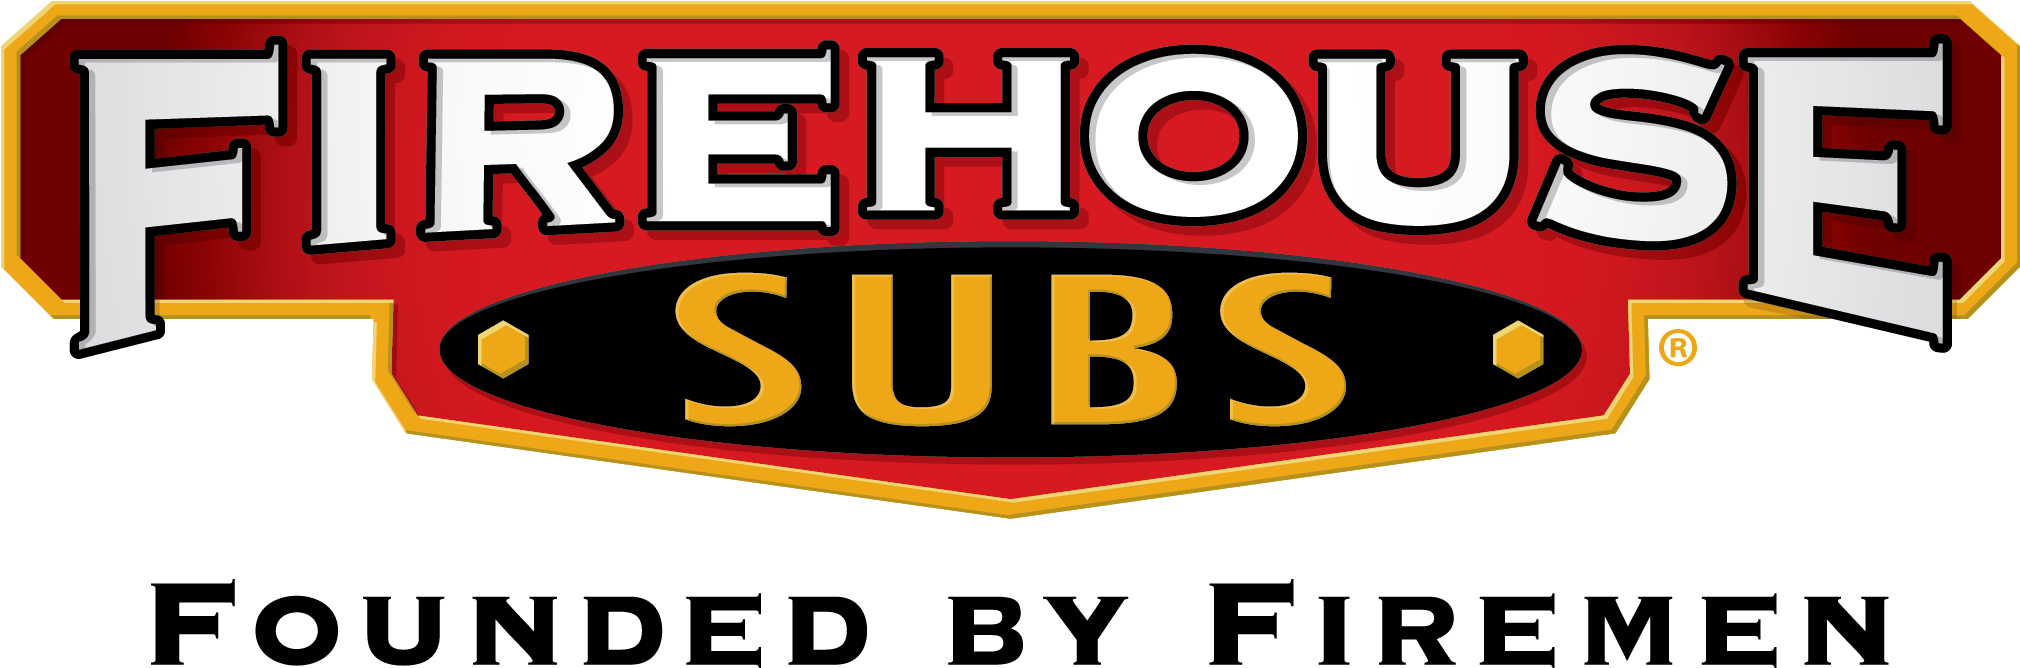 Thank You To All Night To Shine Partners - Firehouse Subs Logo (2131x784)